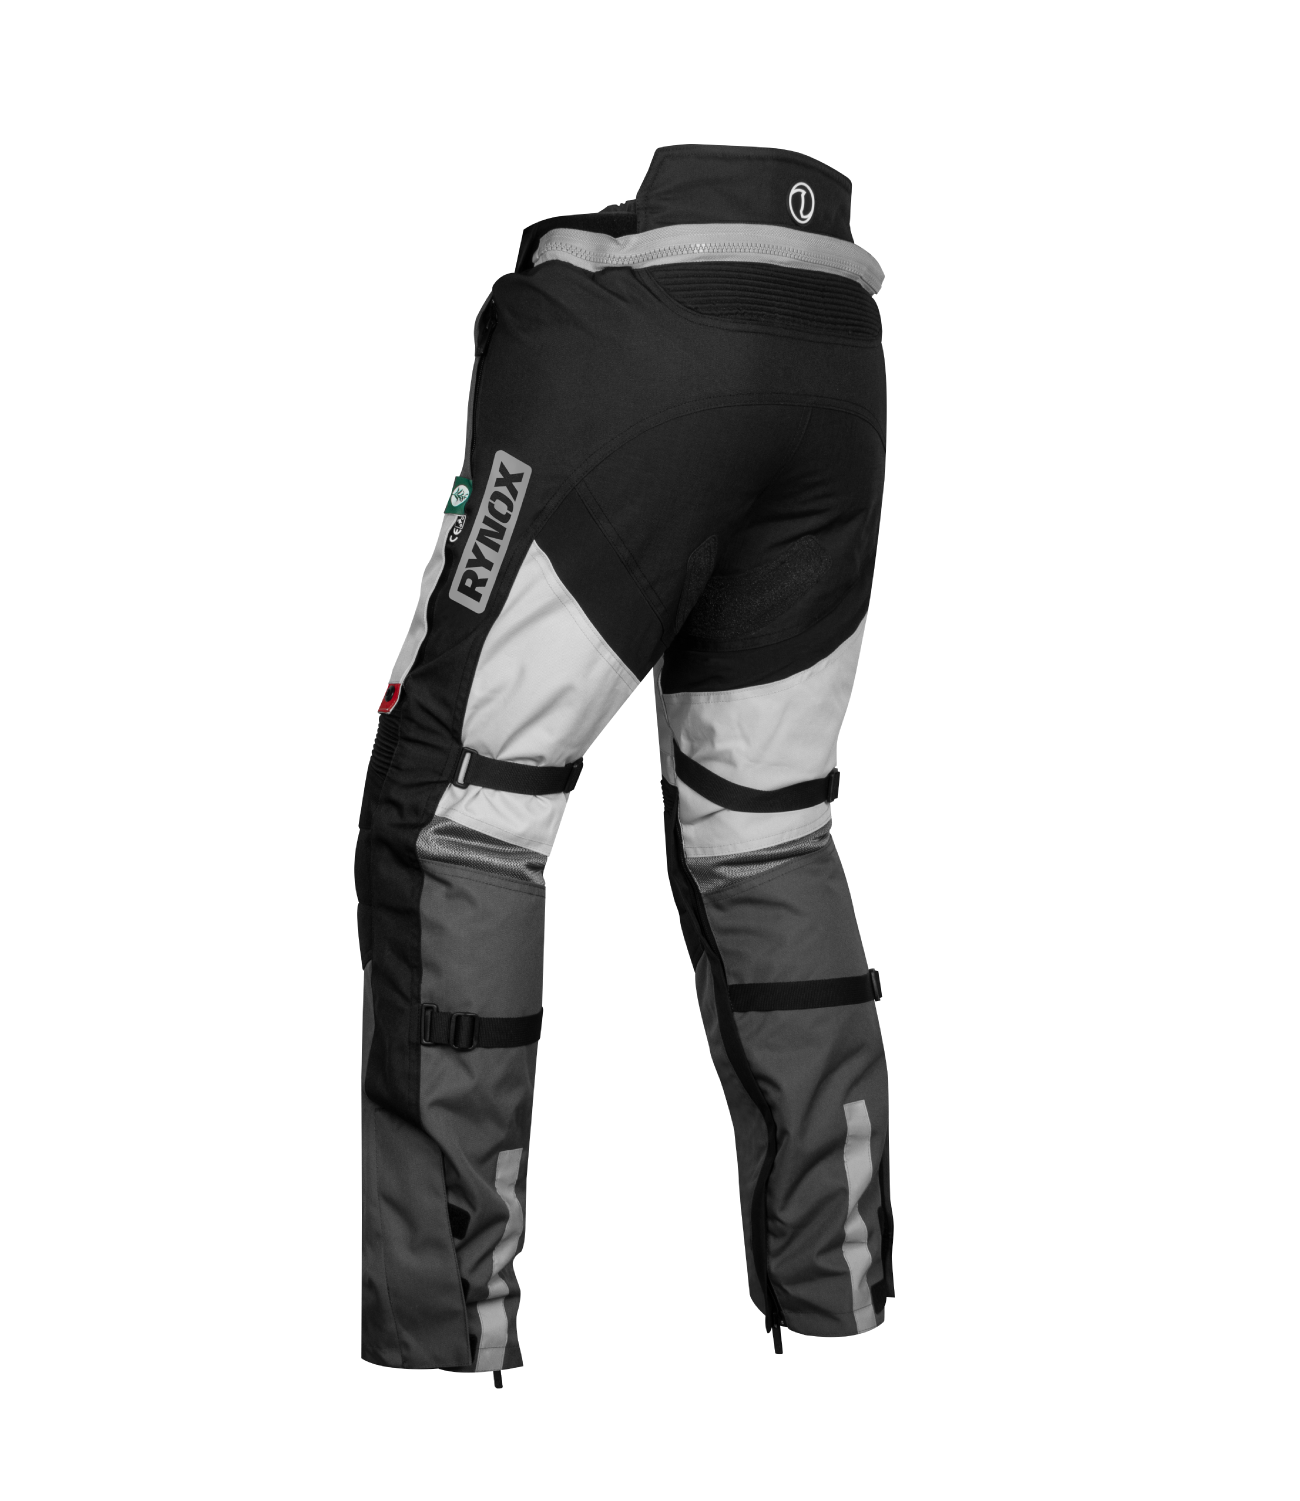 rynox riding pants Archives - Probikers Pune